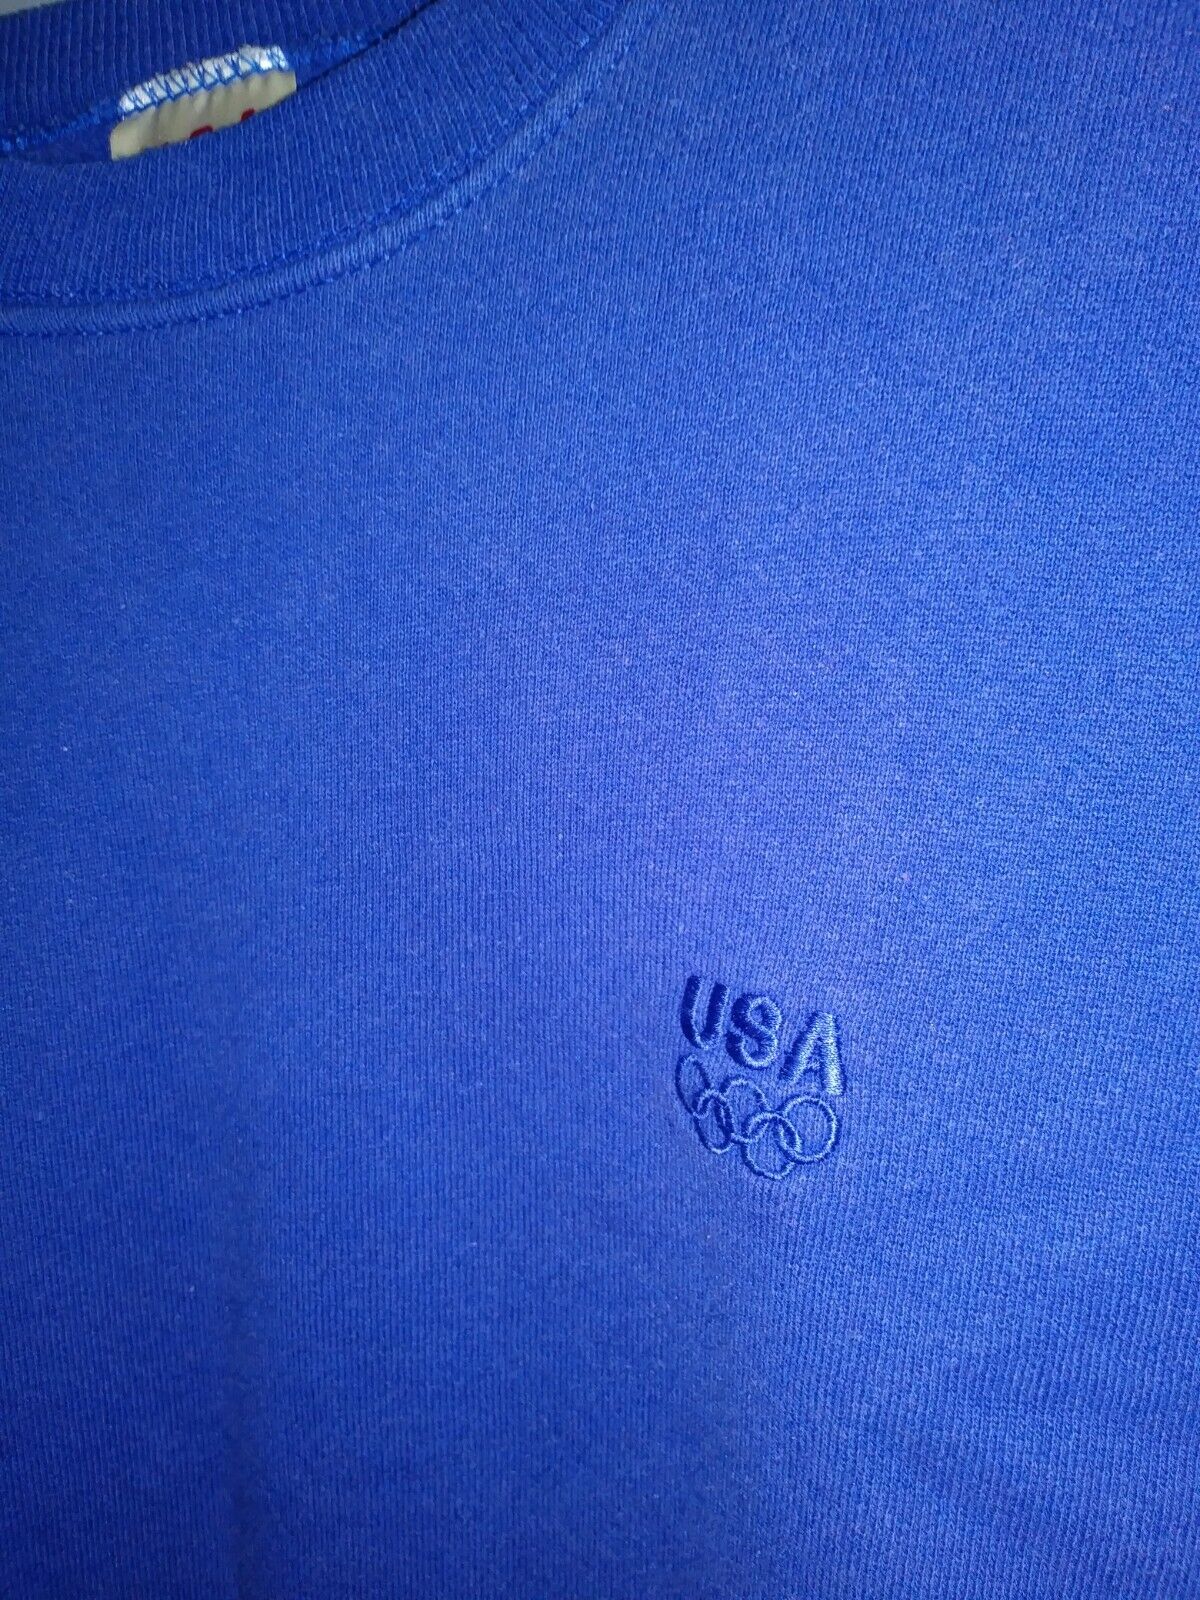 JC Penny Blue Olympic Pullover Sweater No Tag See… - image 10